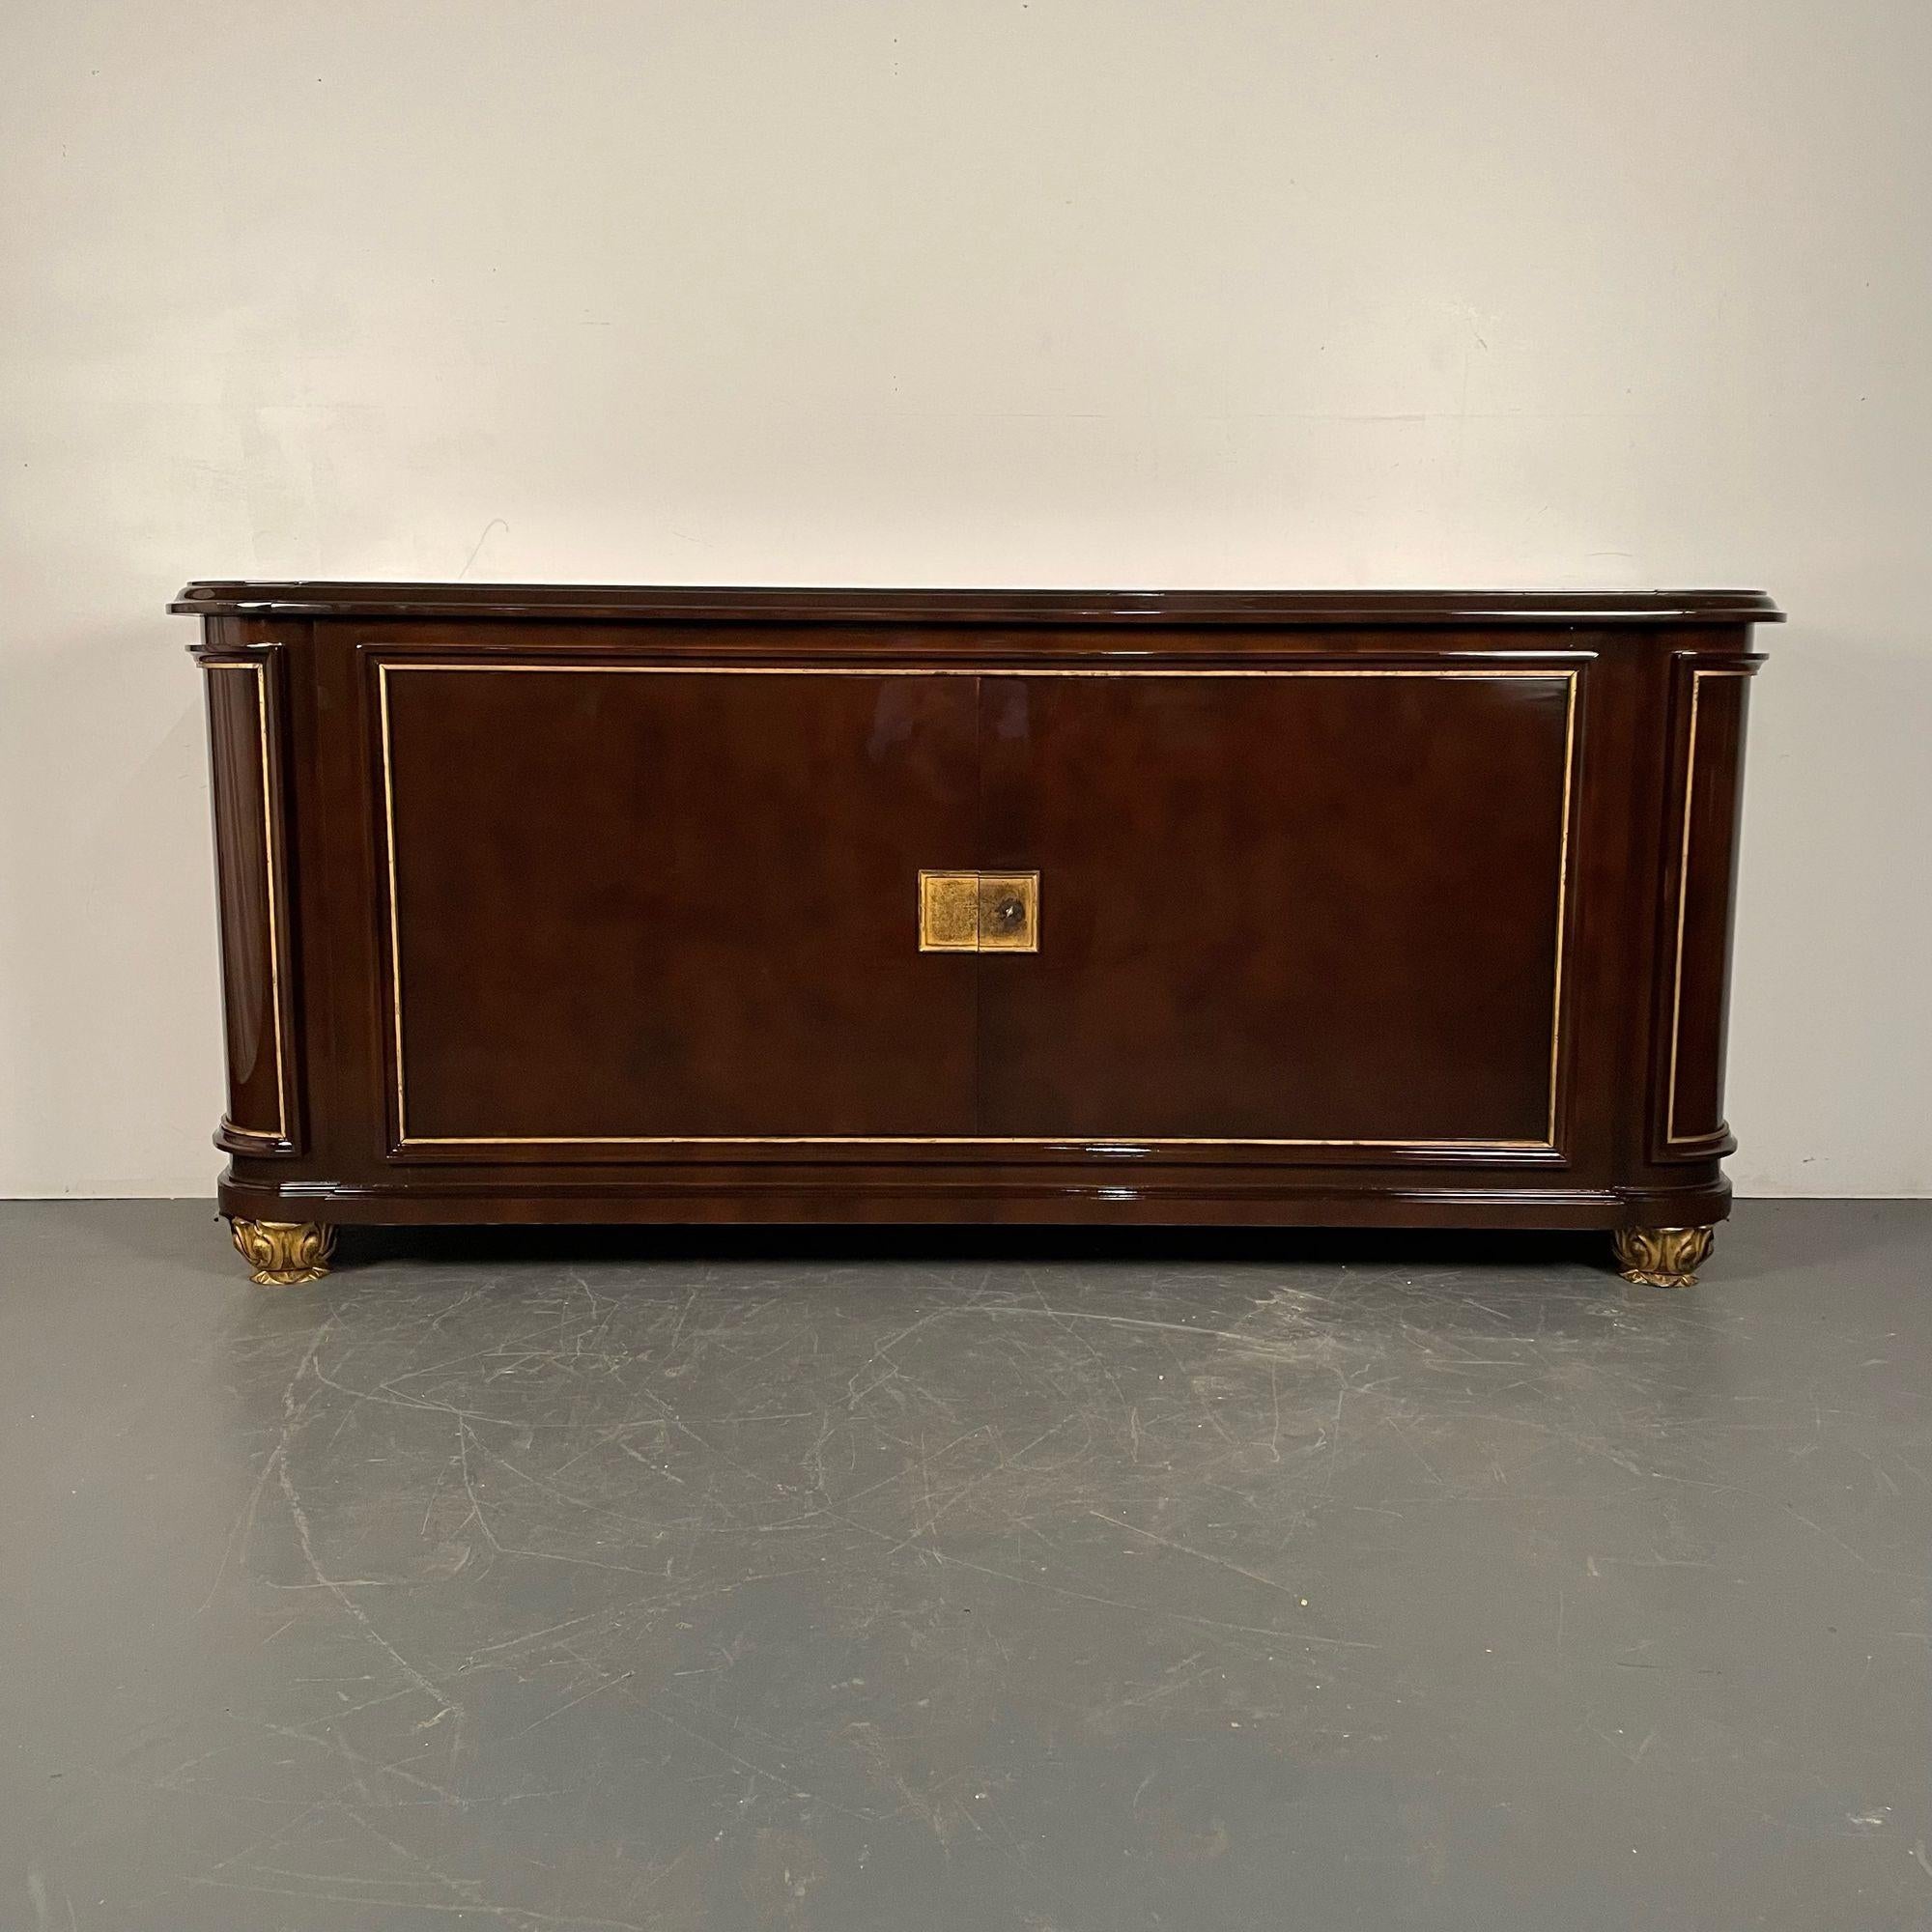 Rene Drouet, French Art Deco, Sideboard, Brown Lacquer, Gilt Wood, France, 1940s

Important mid-century brown lacquer and gilt two-door cabinet or sideboard. Two large doors leading to a fitted finished interior having inlays and interior drawers